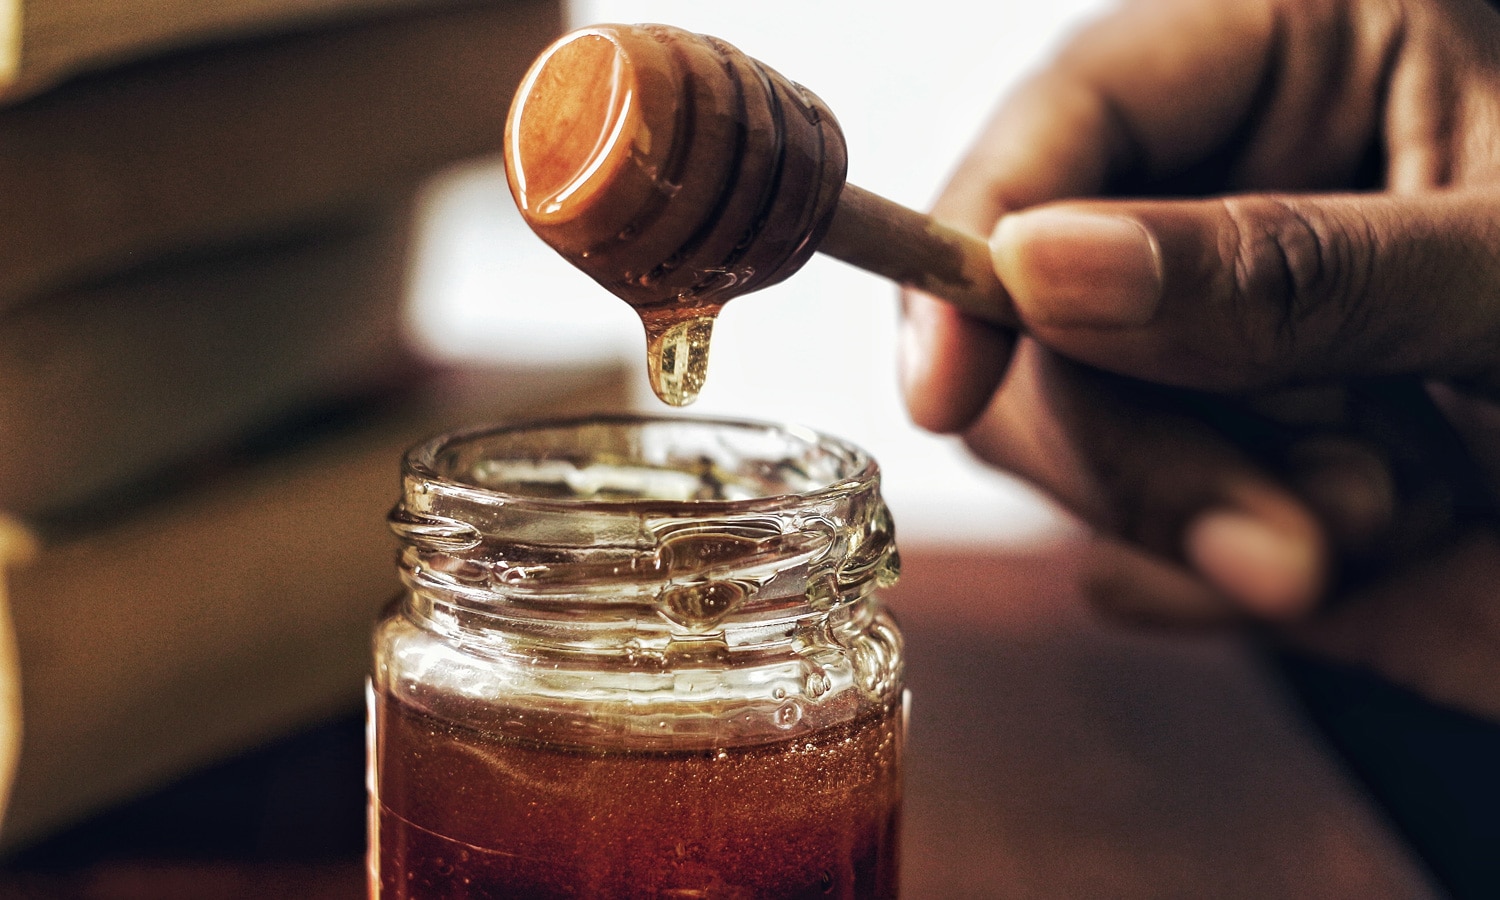 What You Need To Know About CBD Honey